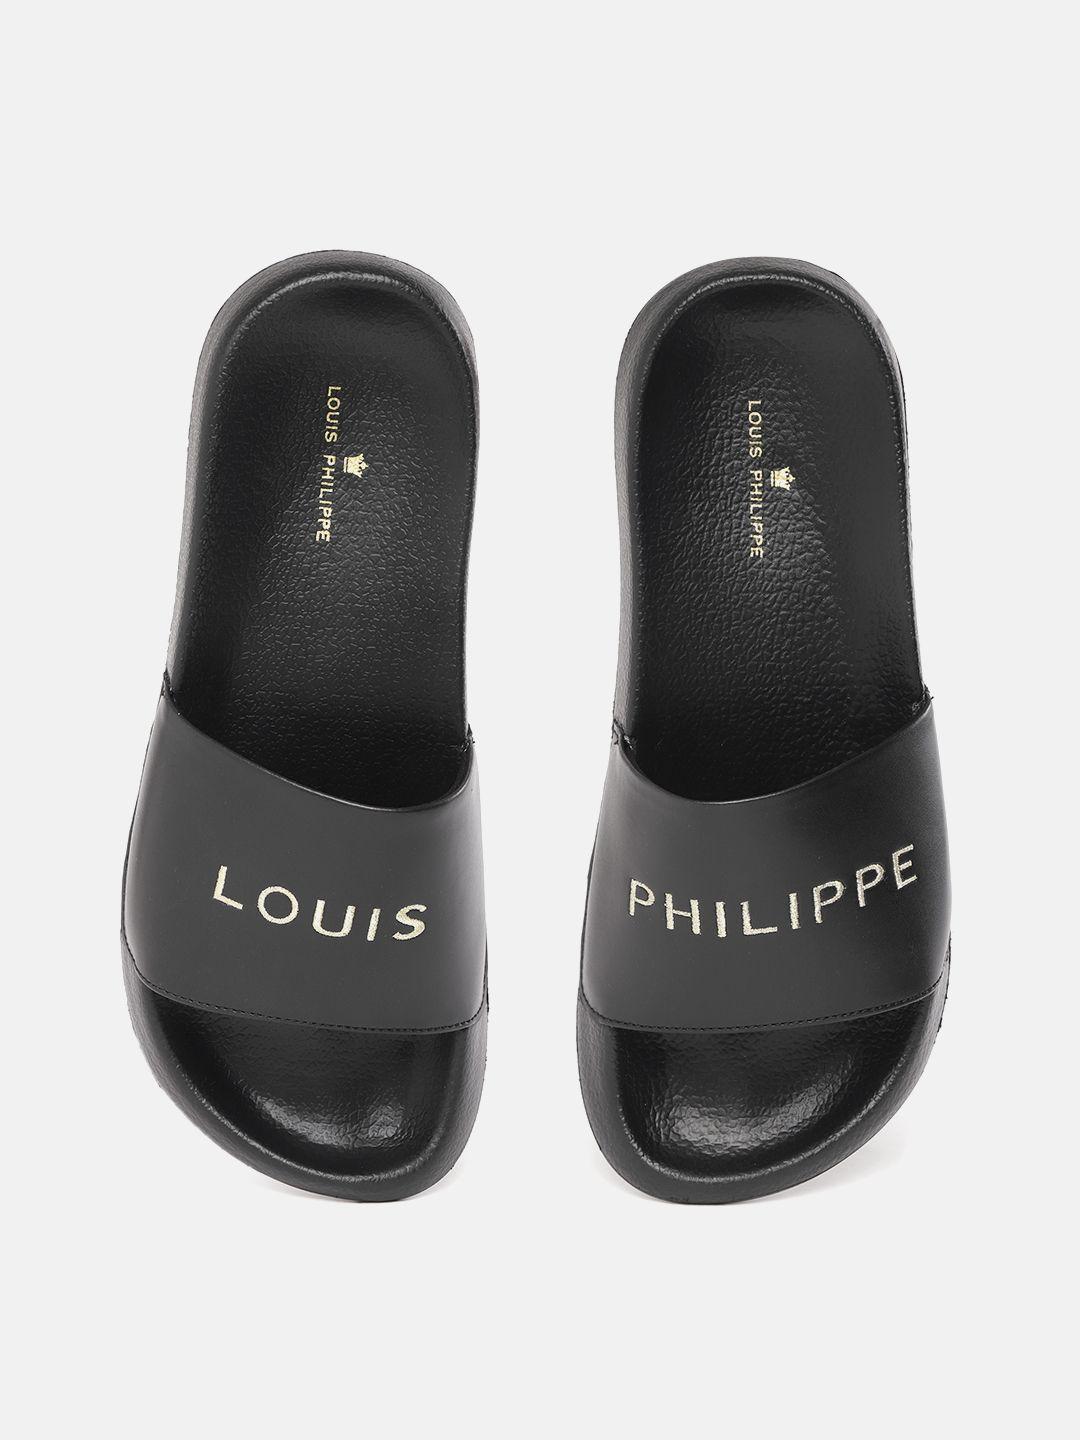 louis philippe men black & gold-toned brand name embroidered sliders